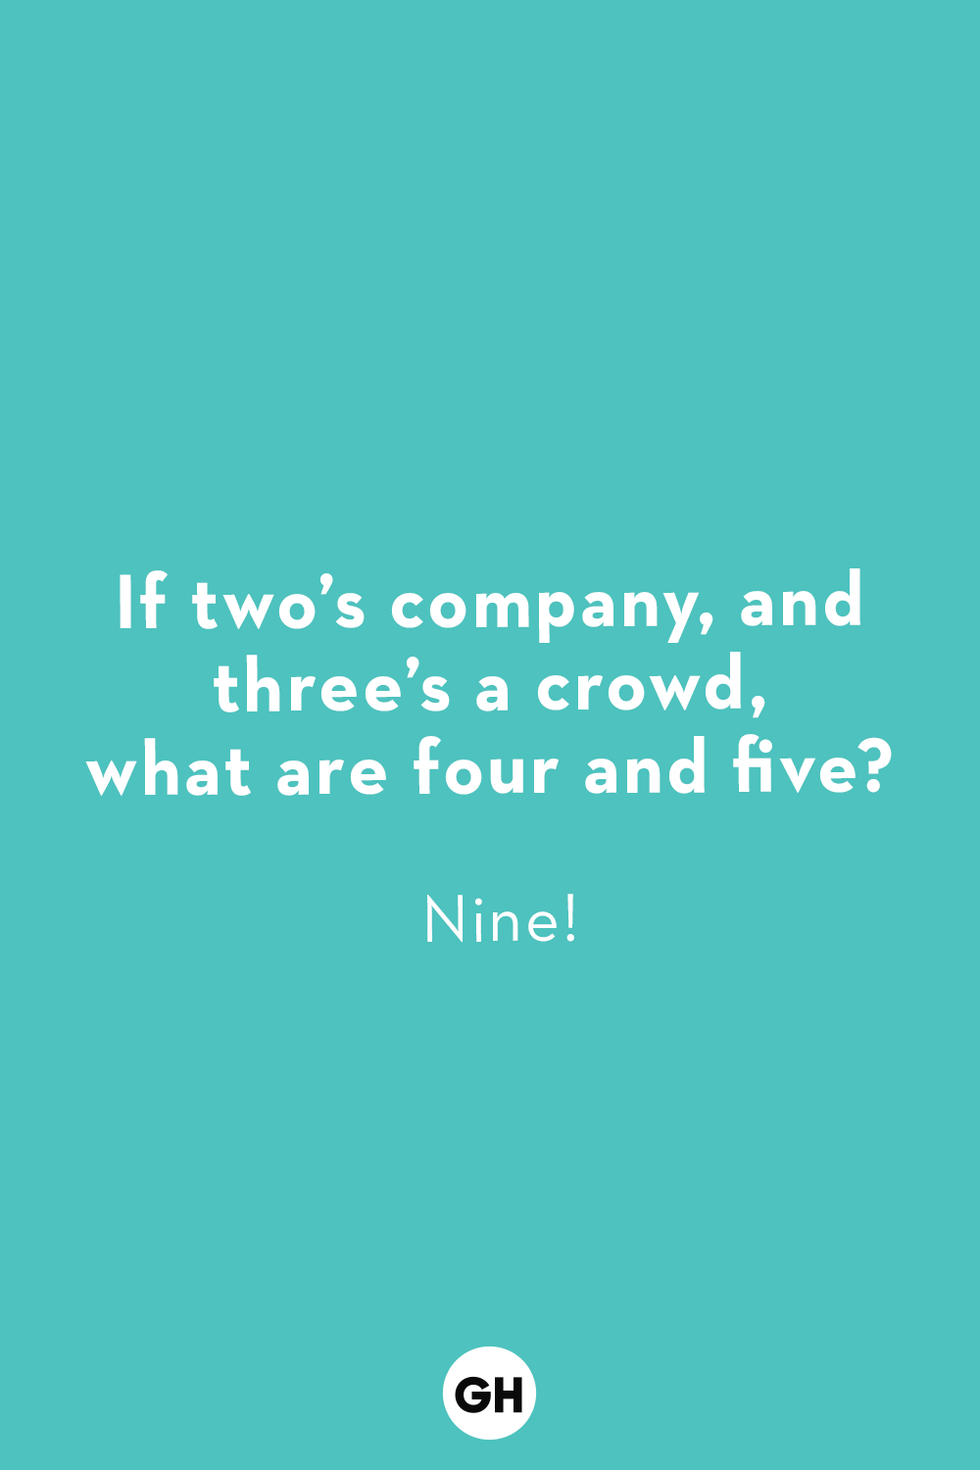 a riddle for kids that says q if two’s a company and three’s a crowd what are four and five a nine